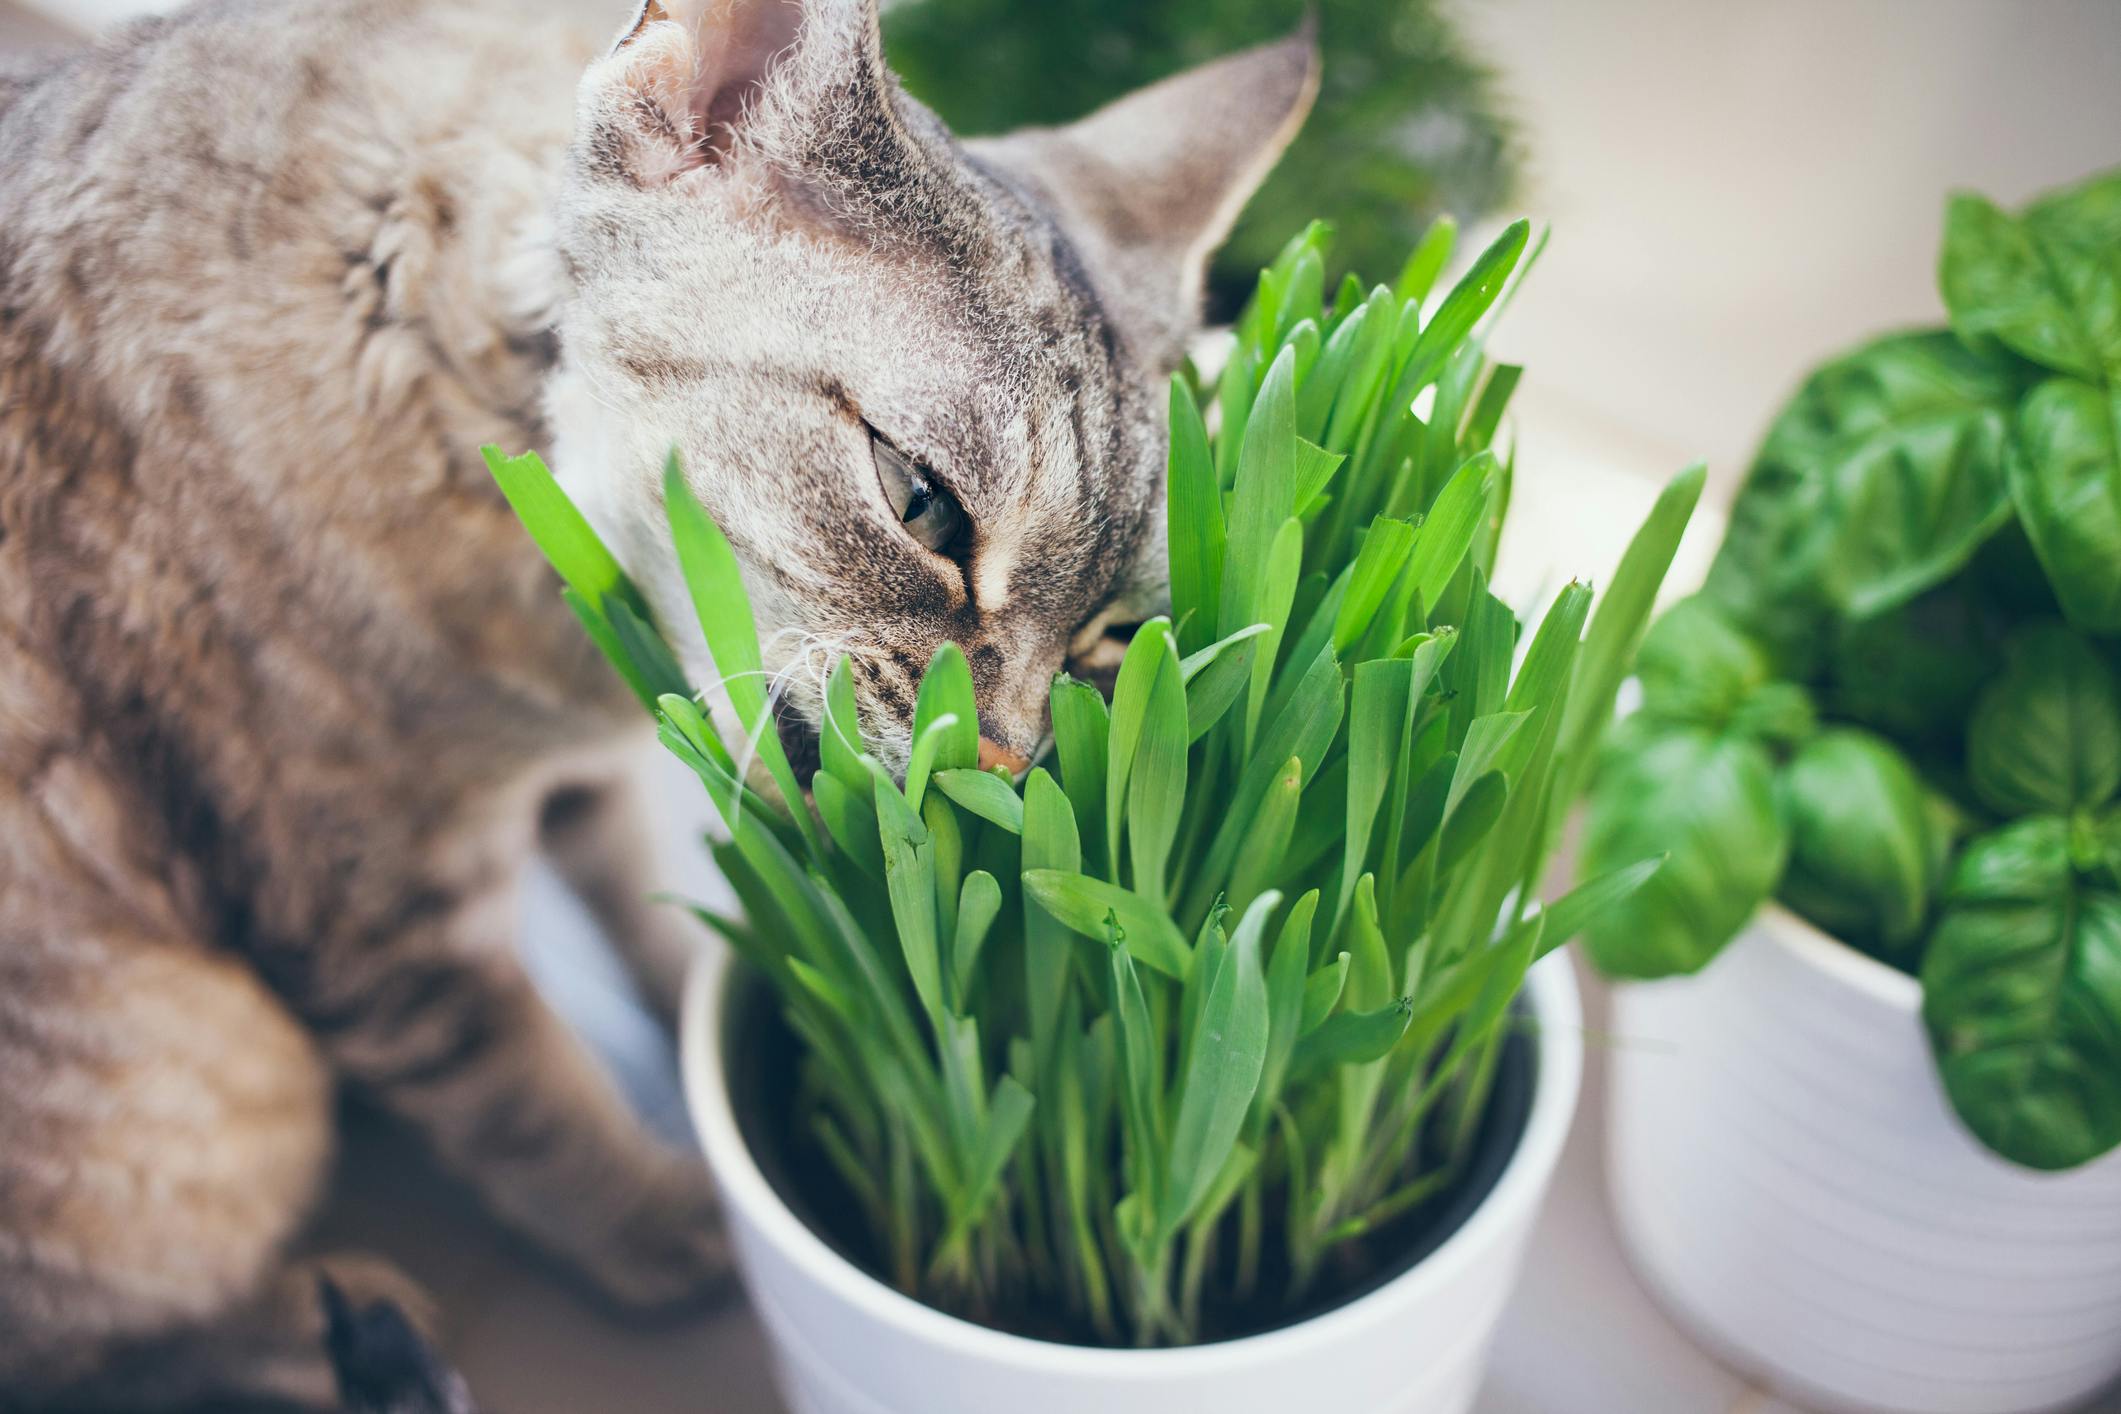 Cat eating the cat grass plant